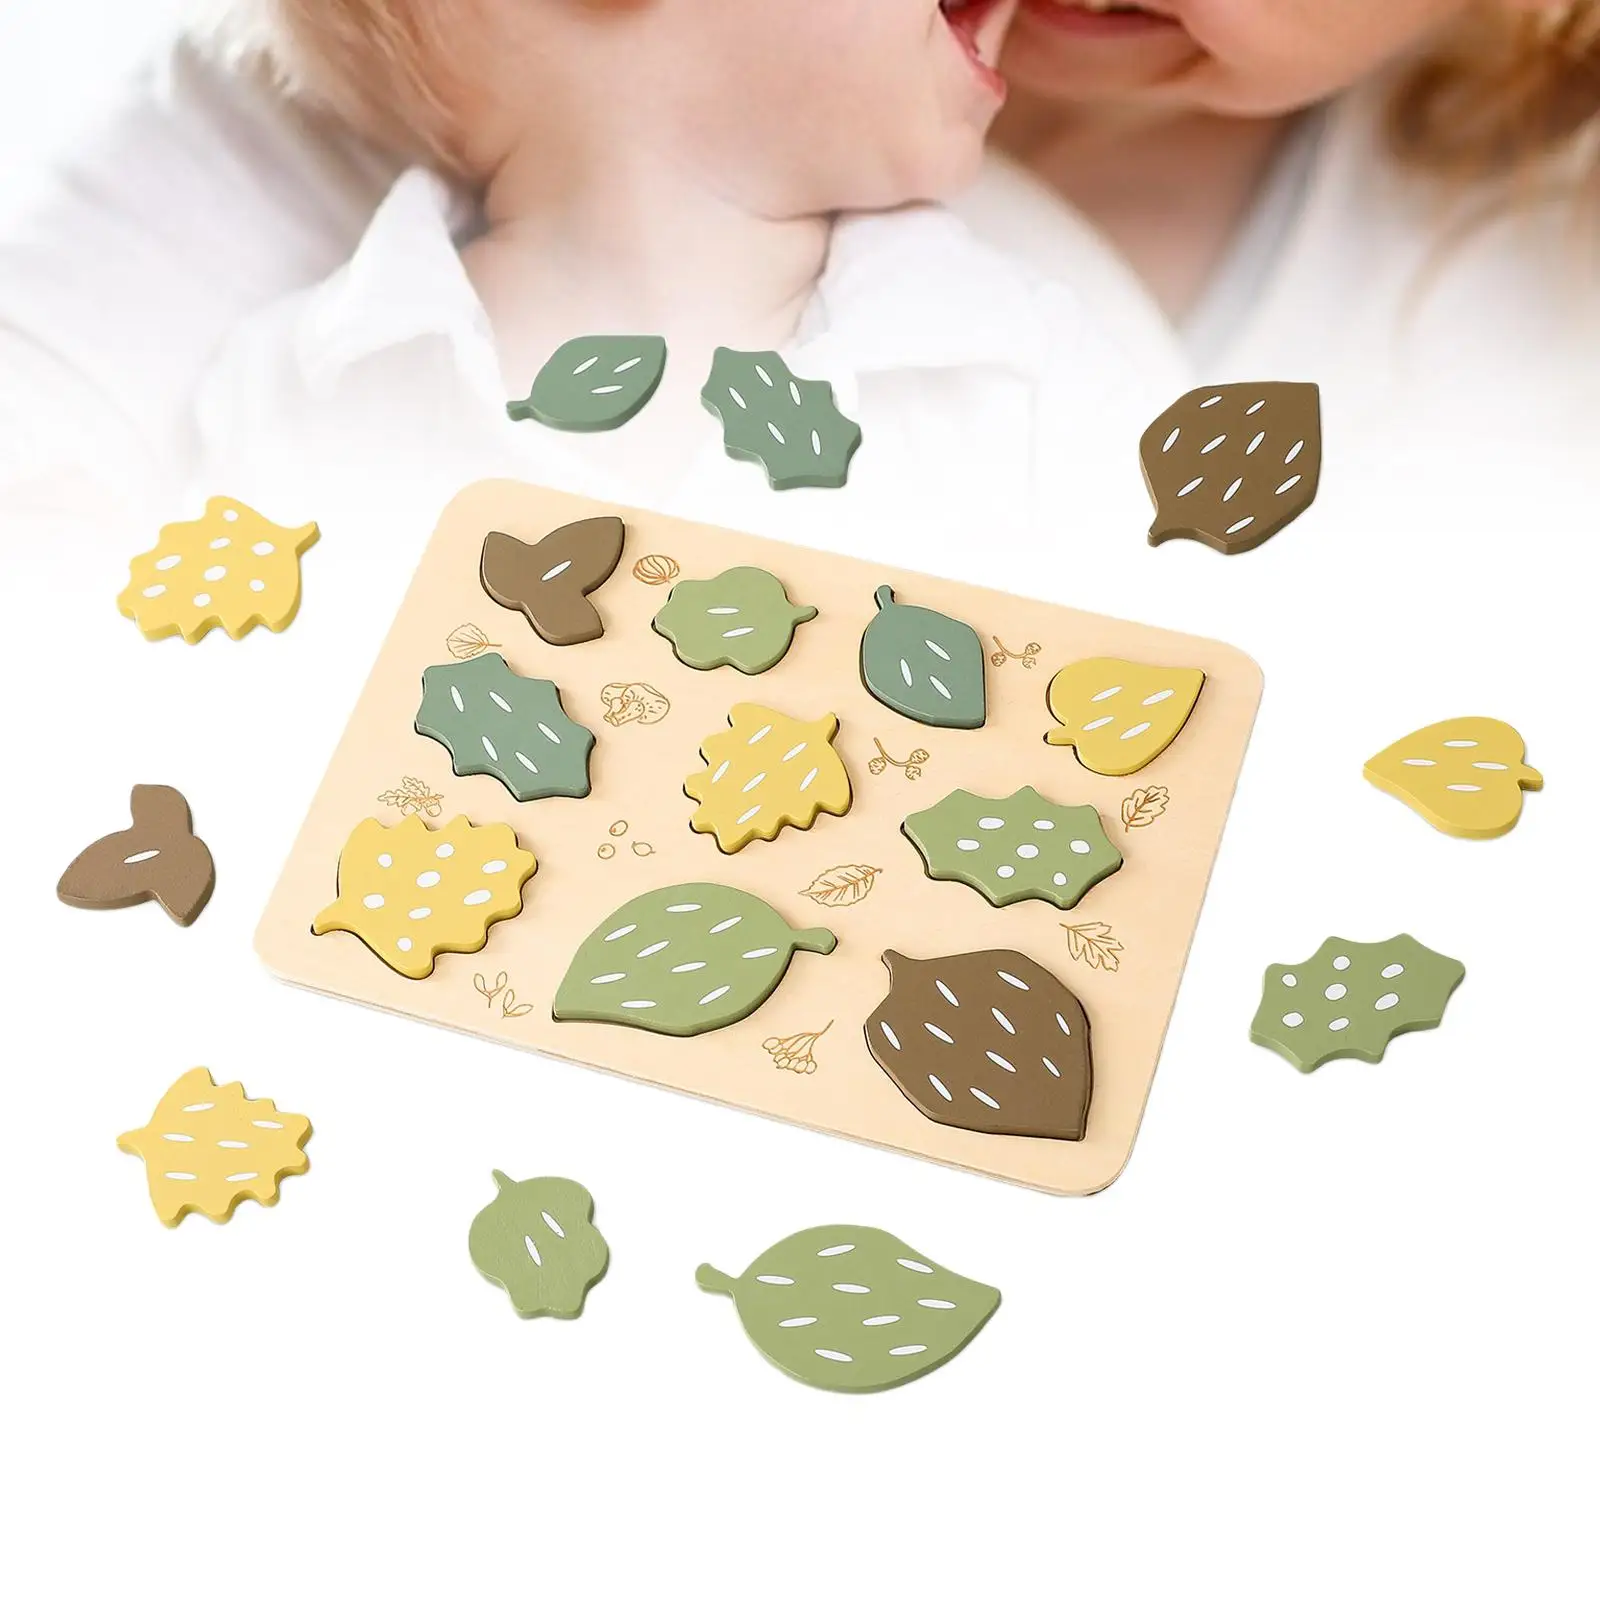 Leaf Jigsaw Puzzles Sorting Puzzle Montessori Colorful Shape Stacking Blocks for Preschool Toddlers Boys Kids Girls